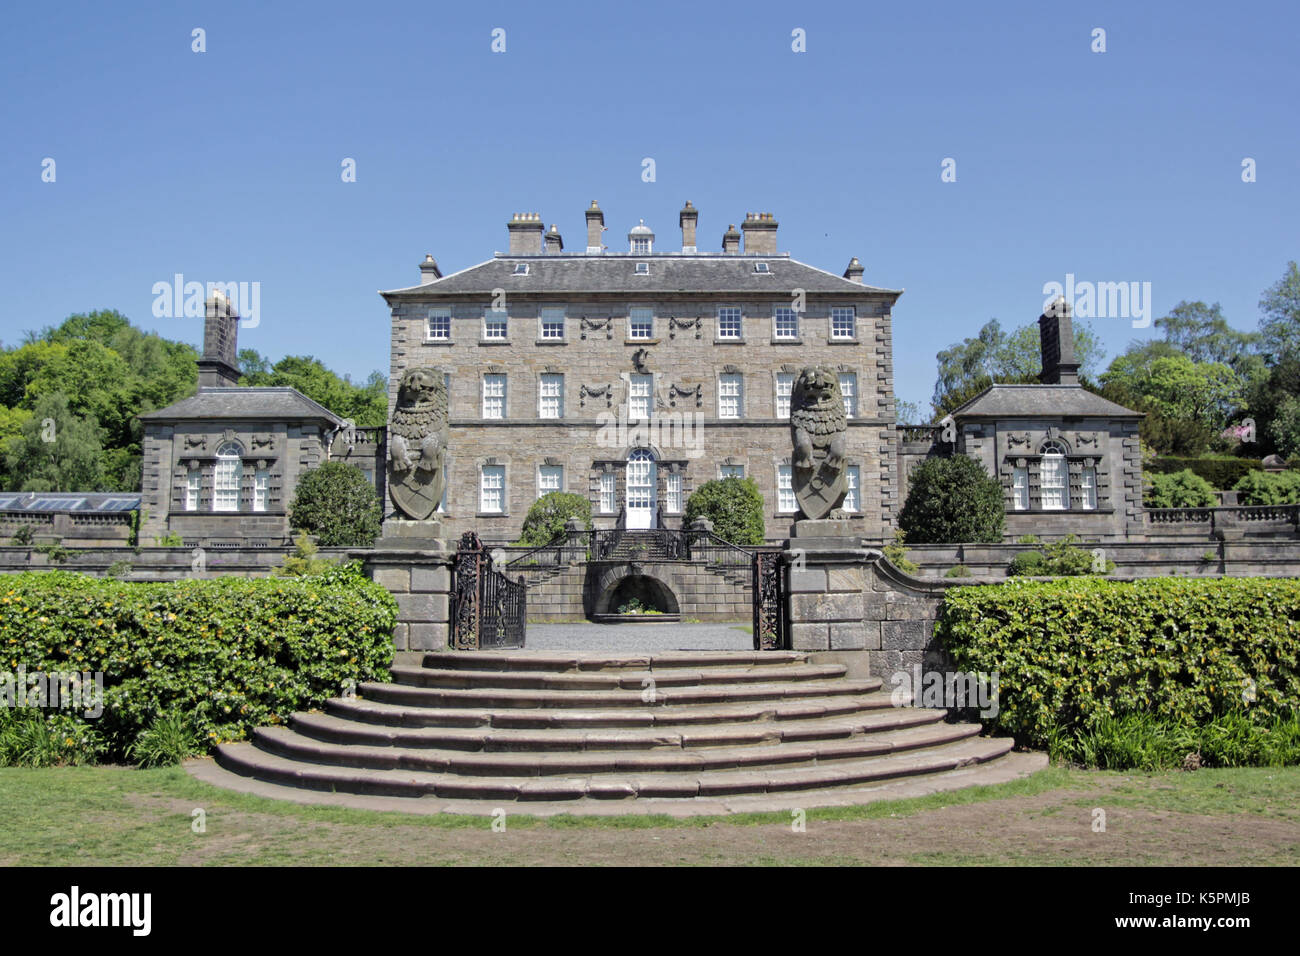 Pollok House is the ancestral home of the Stirling Maxwell families, located in Pollok Country Park, Glasgow, Scotland Stock Photo